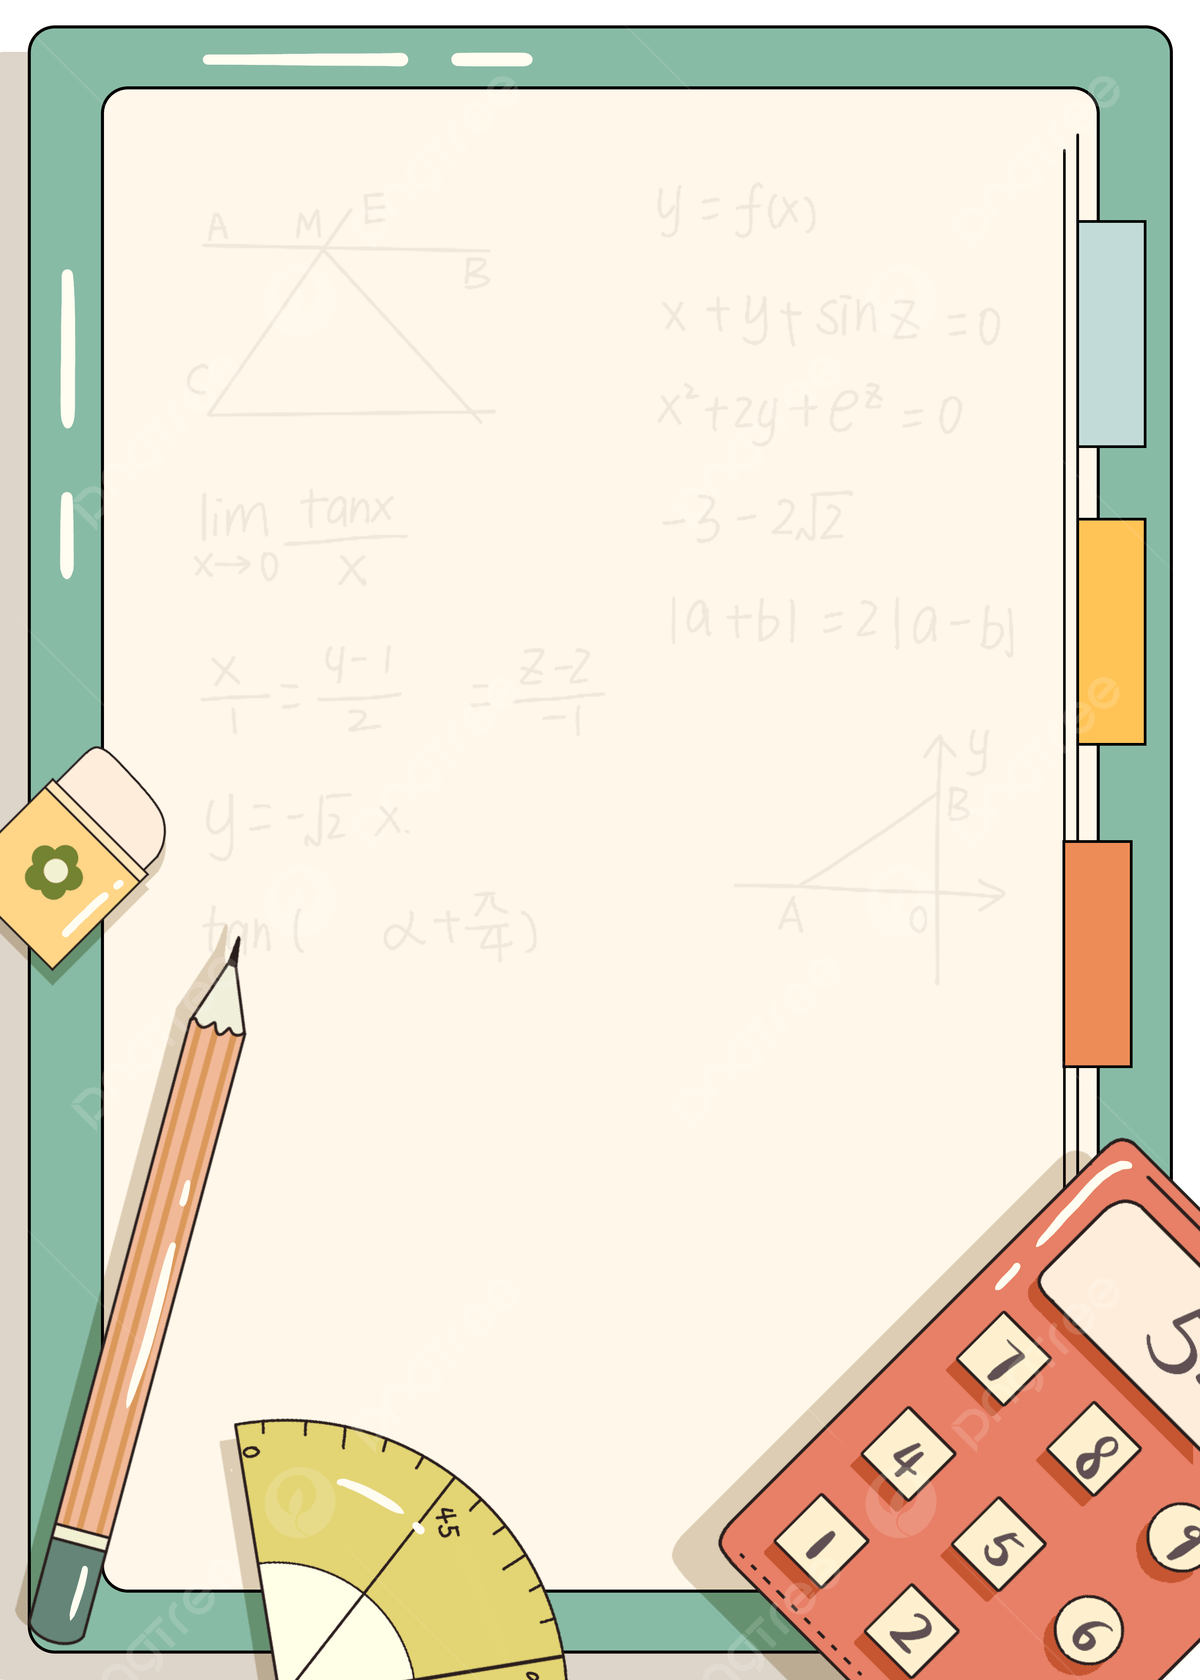 Mathematics Background Image, HD Picture and Wallpaper For Free Download